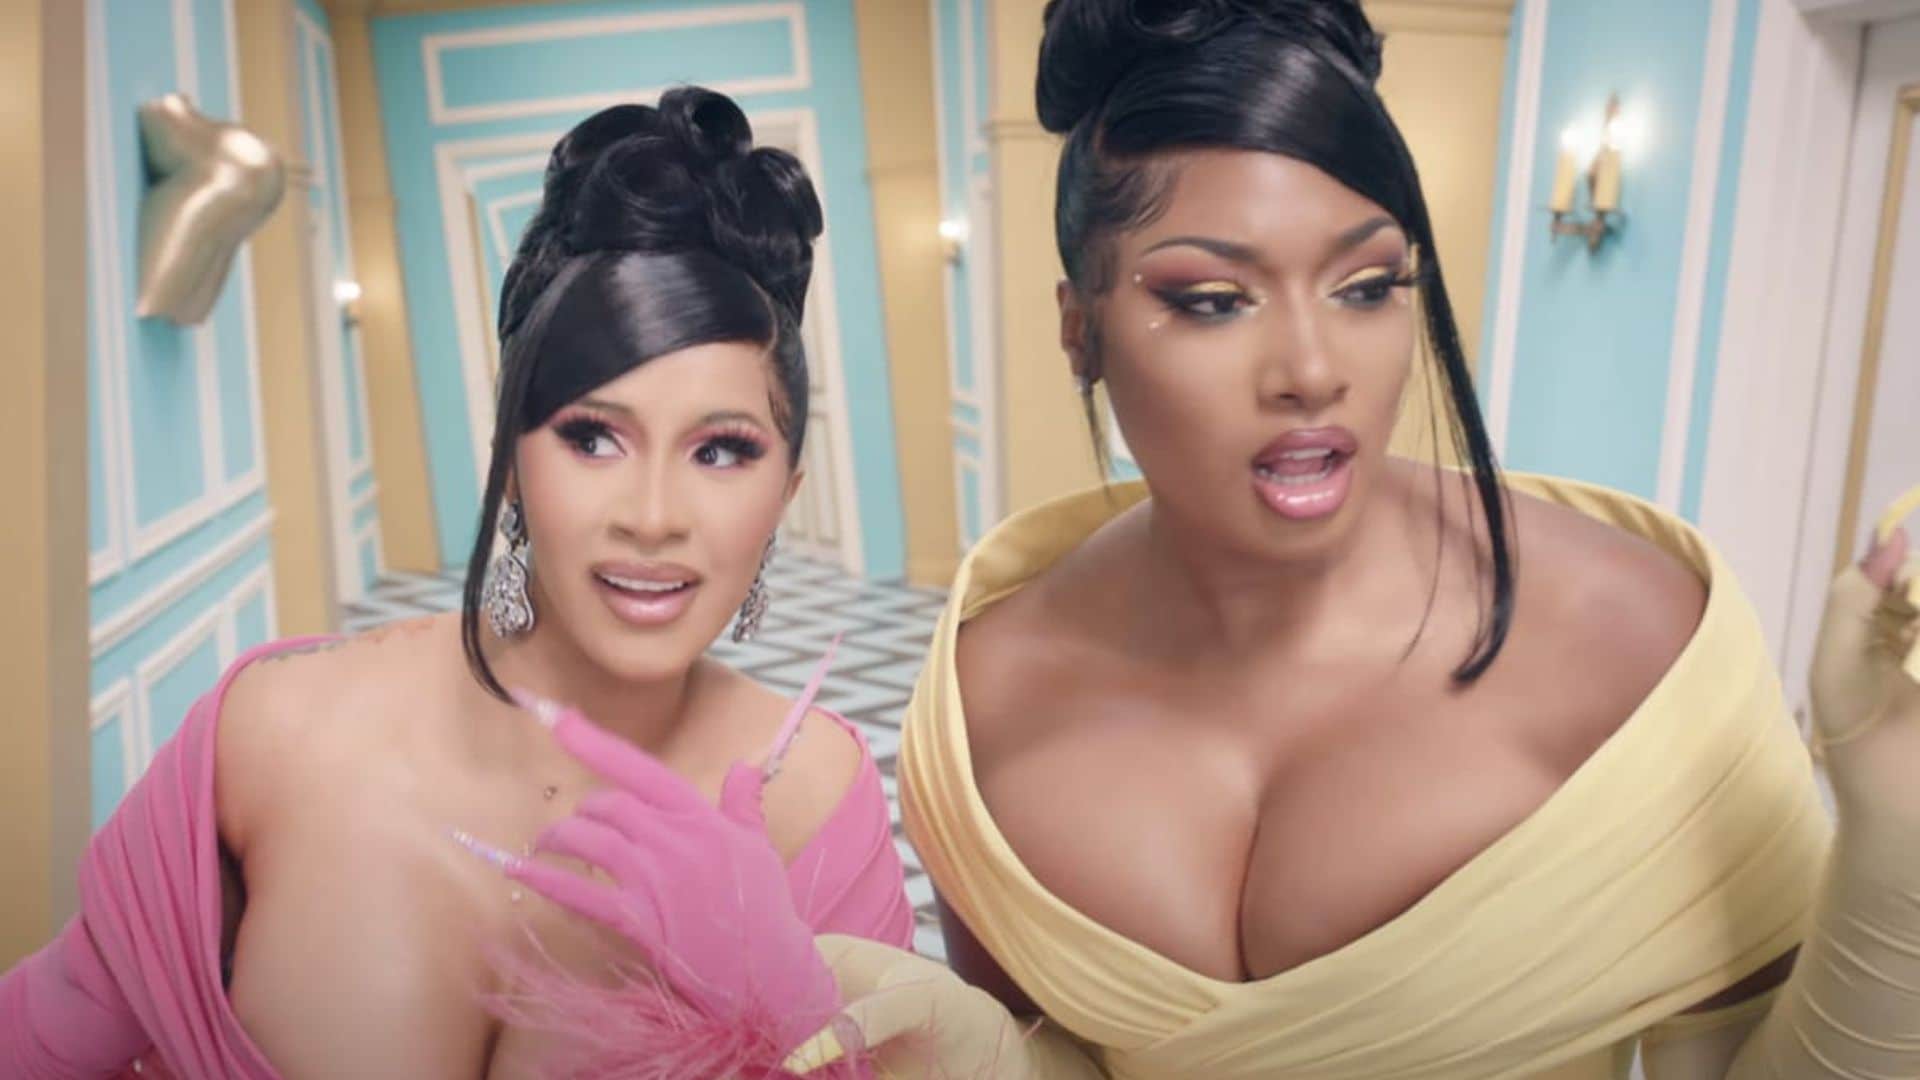 Are Cardi B and Megan Thee Stallion starring in a new film together?